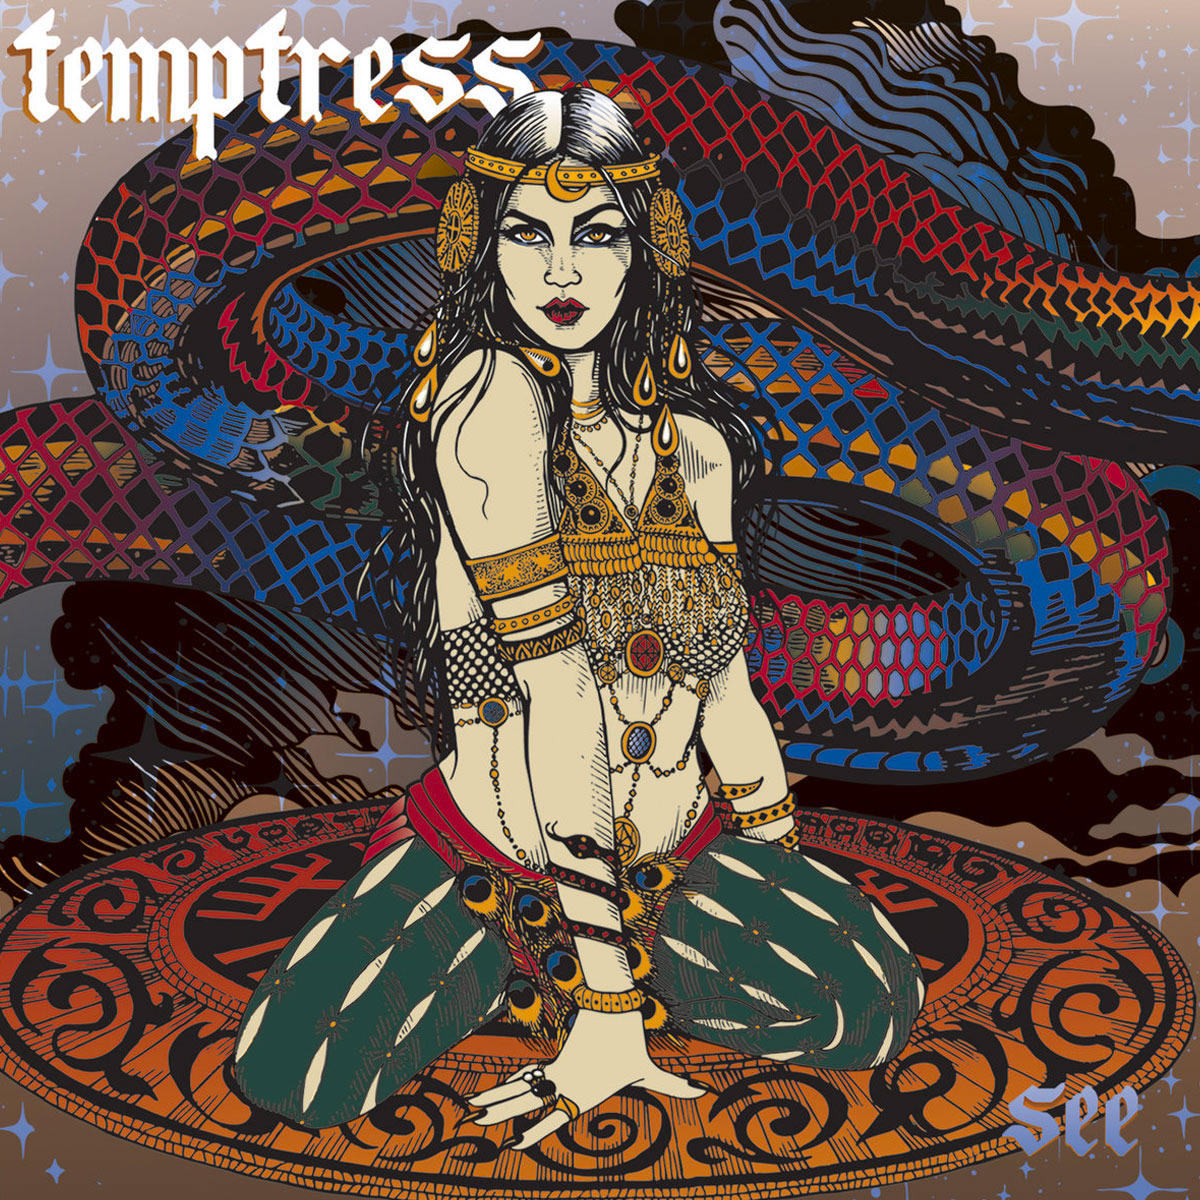 SEE by Temptress